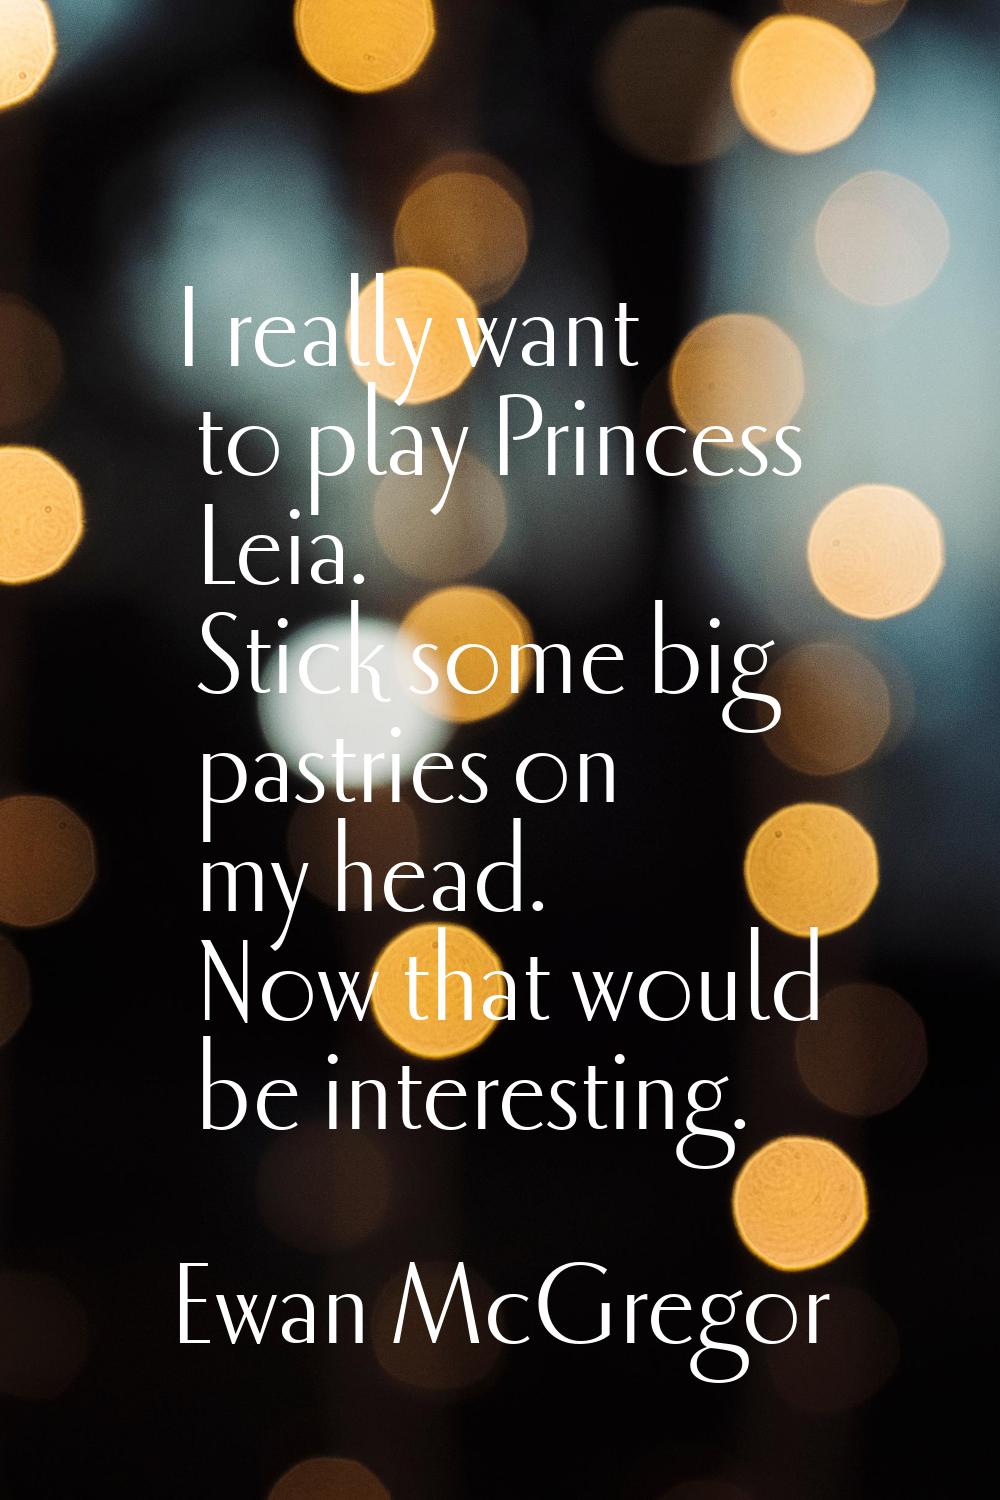 I really want to play Princess Leia. Stick some big pastries on my head. Now that would be interest